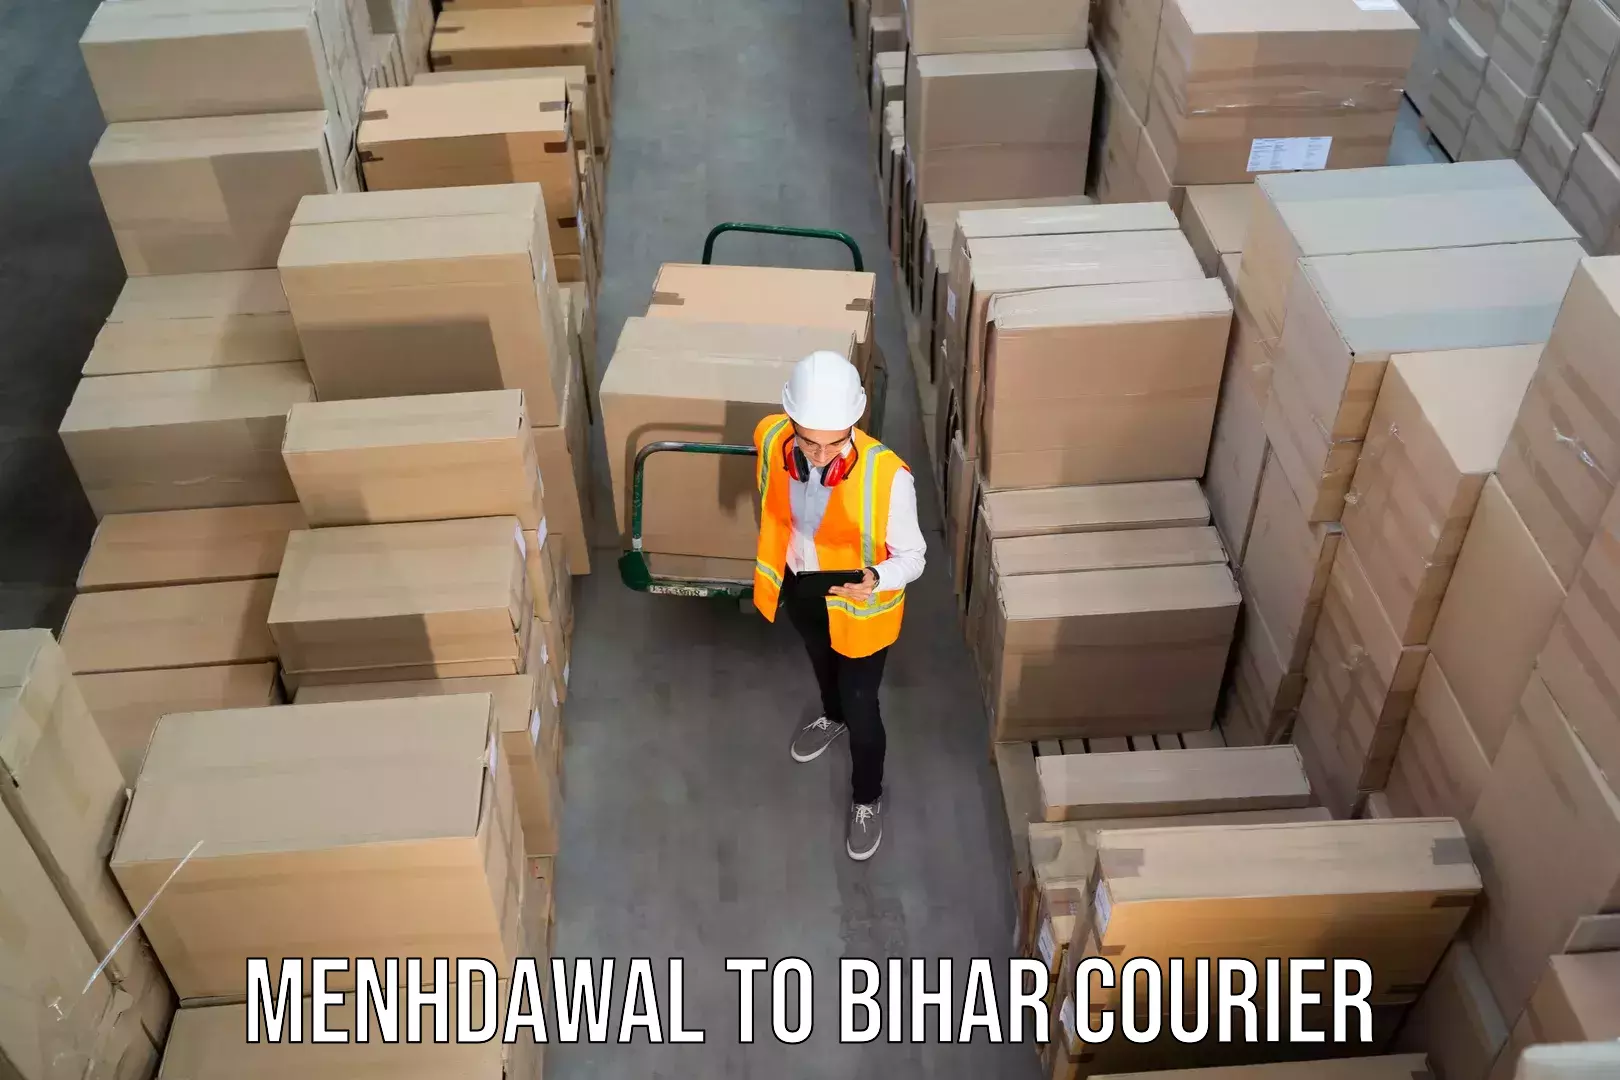 Local delivery service Menhdawal to Bihar